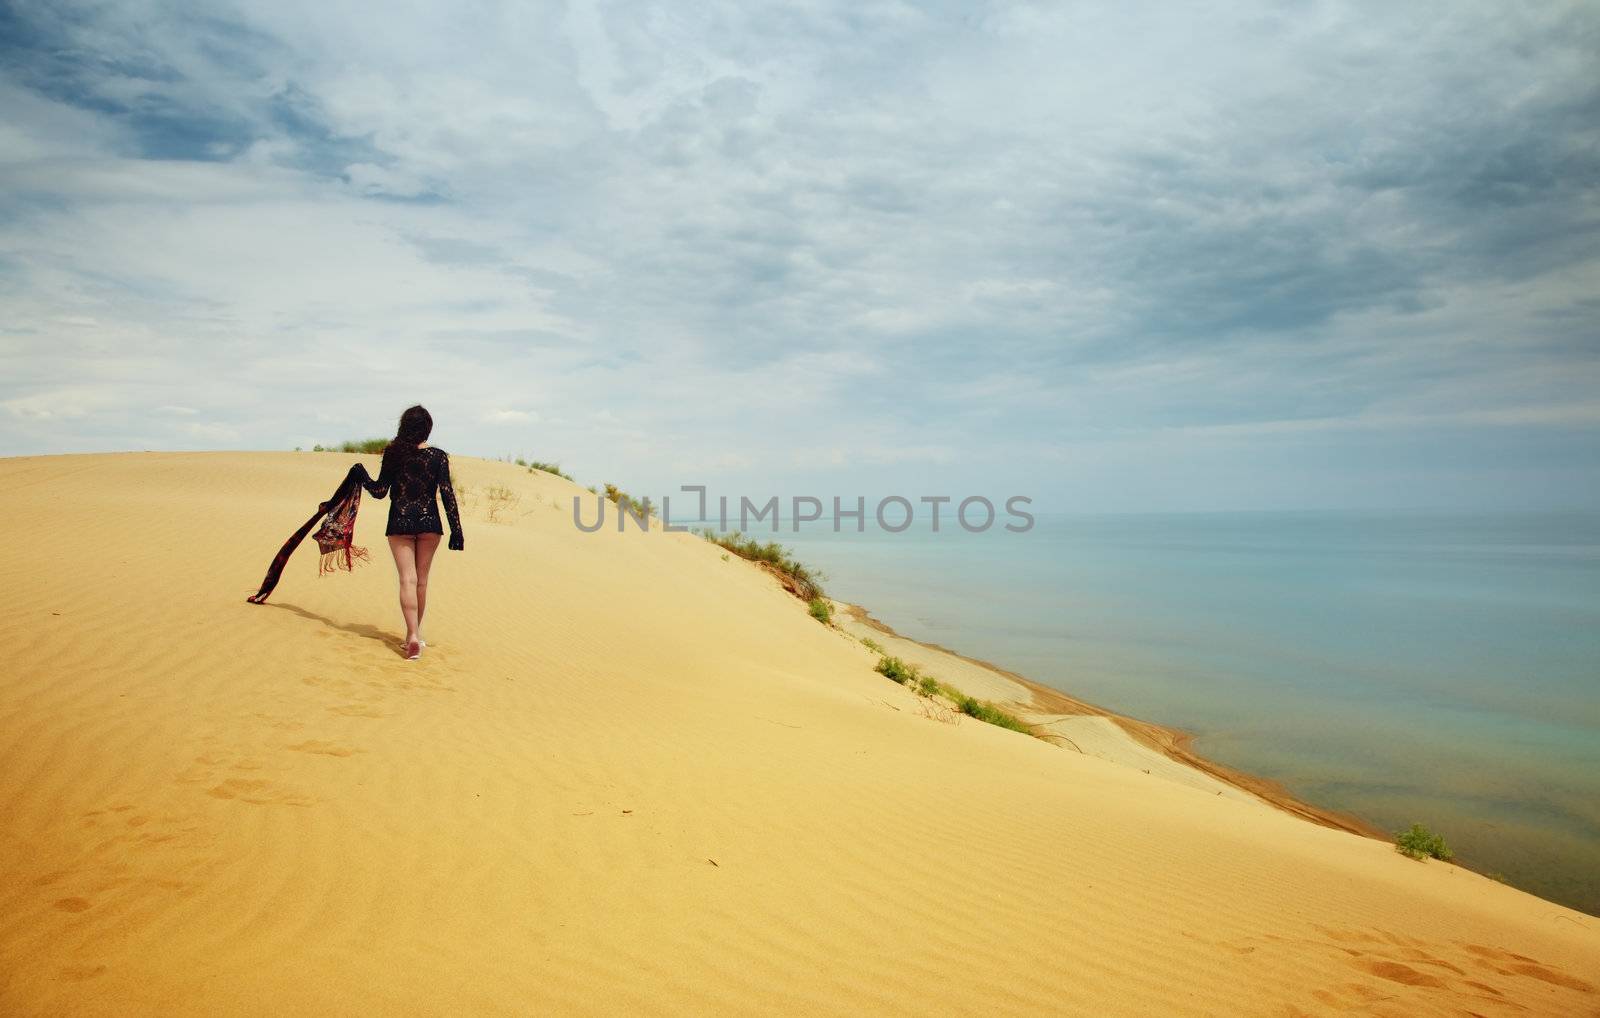 Lonely lady walking in the desert. Vibrant color